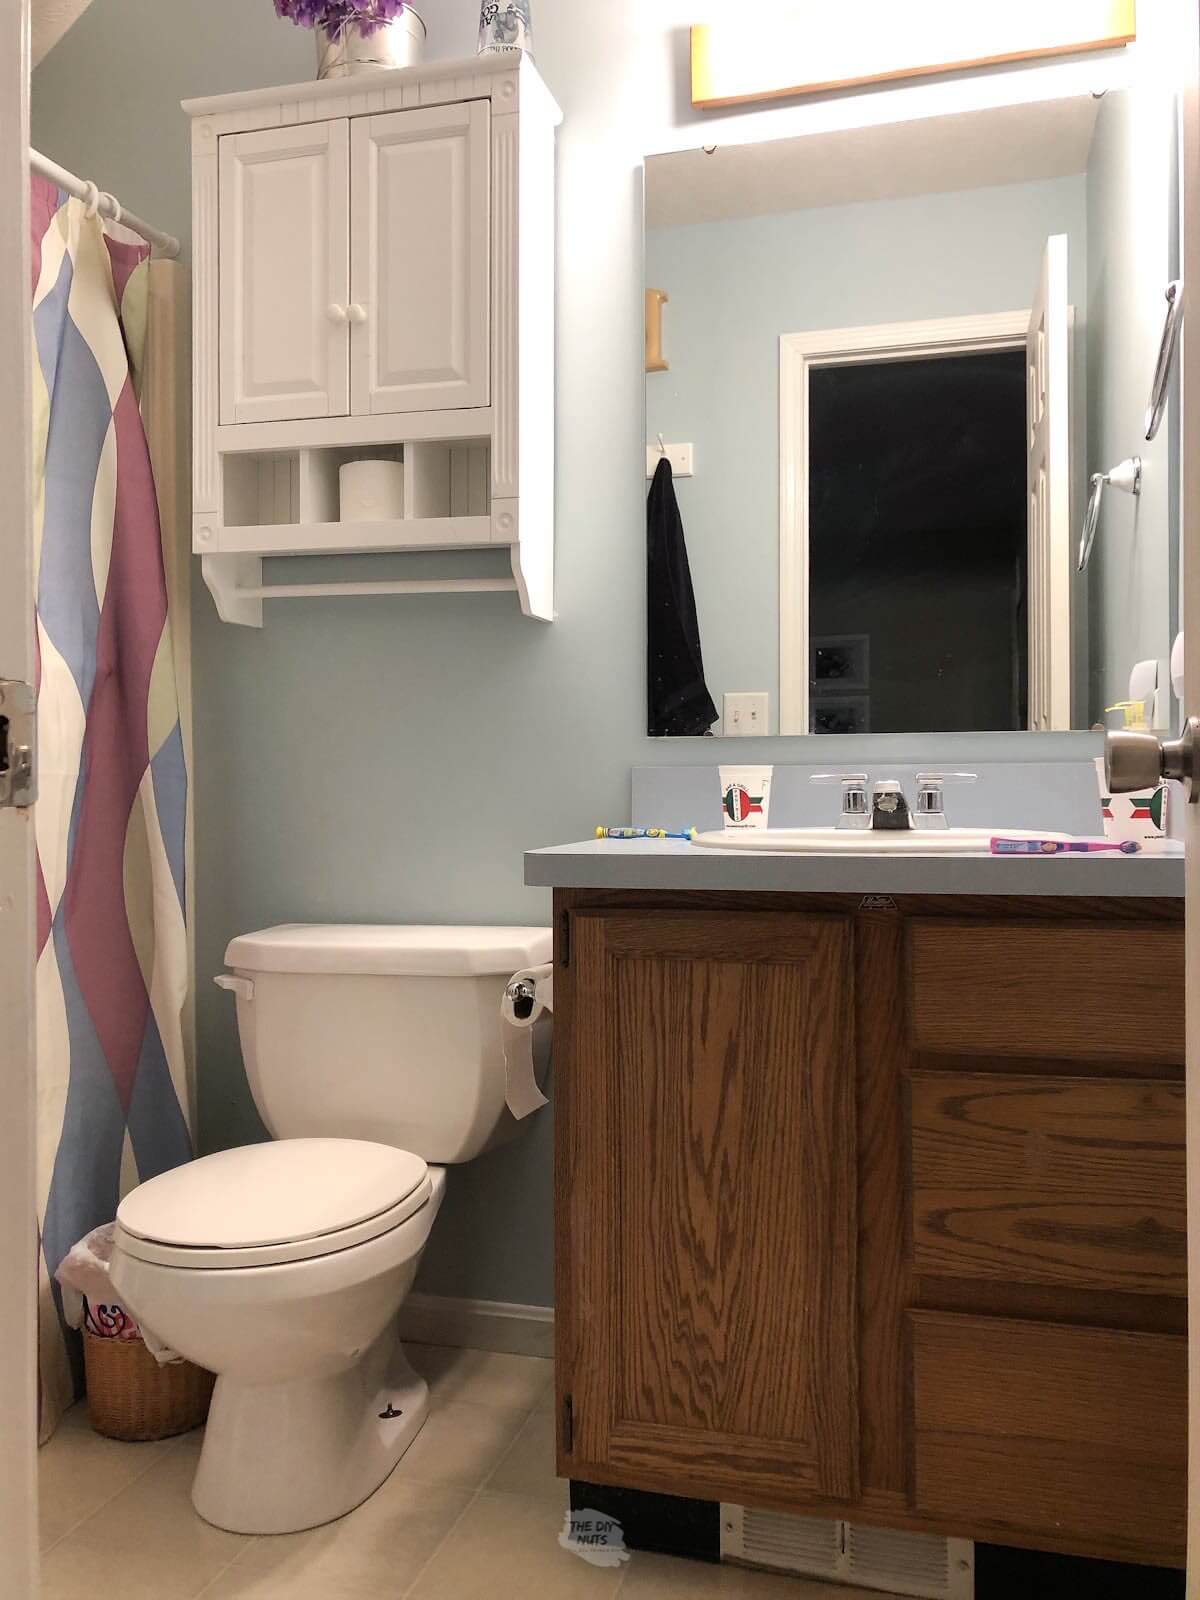 oak bathroom cabinets, white cabinet with mirror and shower curtain.